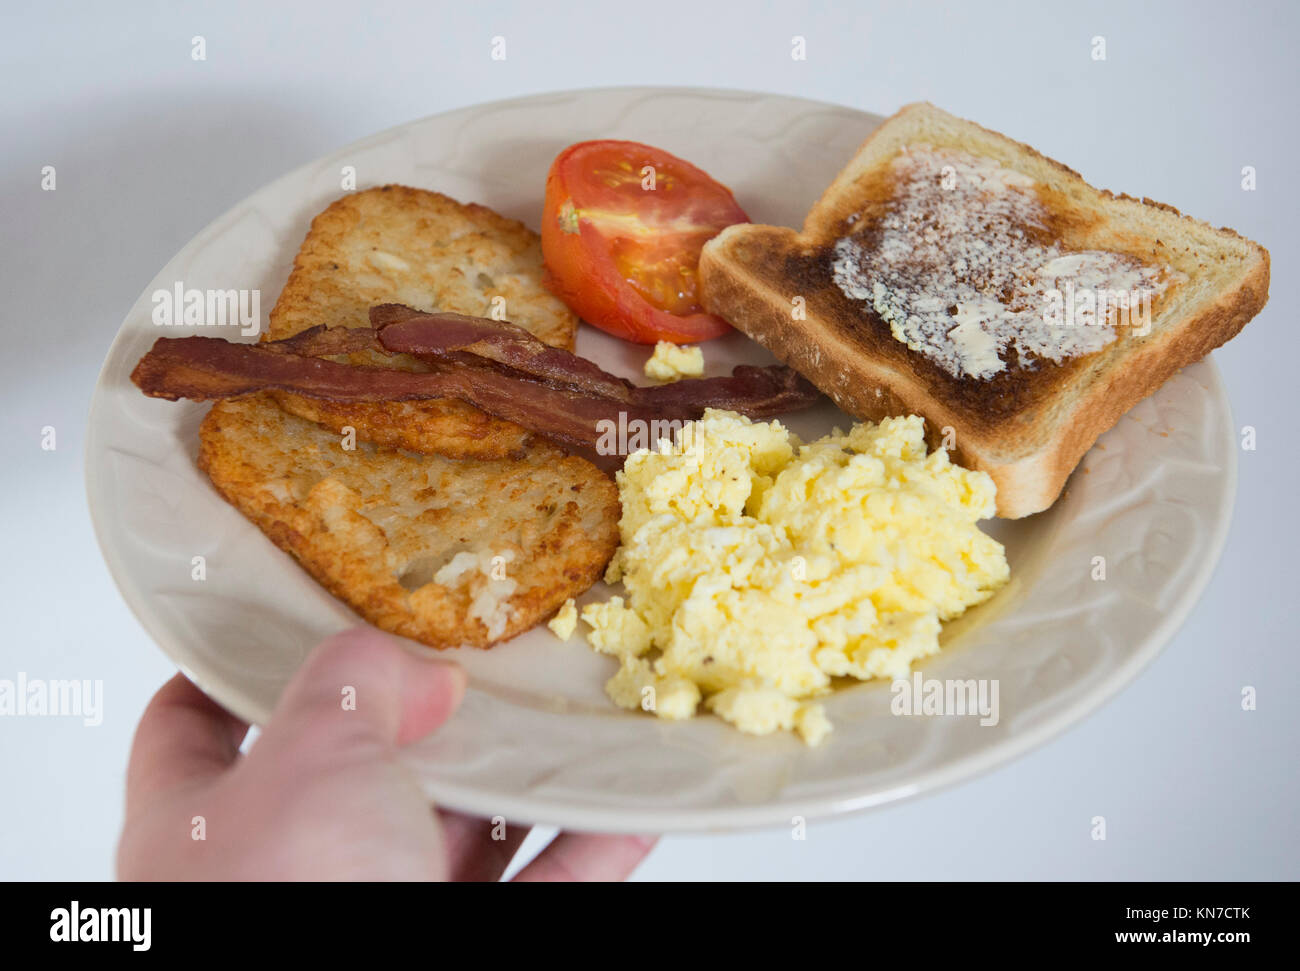 A Breakfast Consisting Of Bacon Hash Browns Tomato Toast And Scrambled Eggs Is Shown On A Plate Stock Photo Alamy